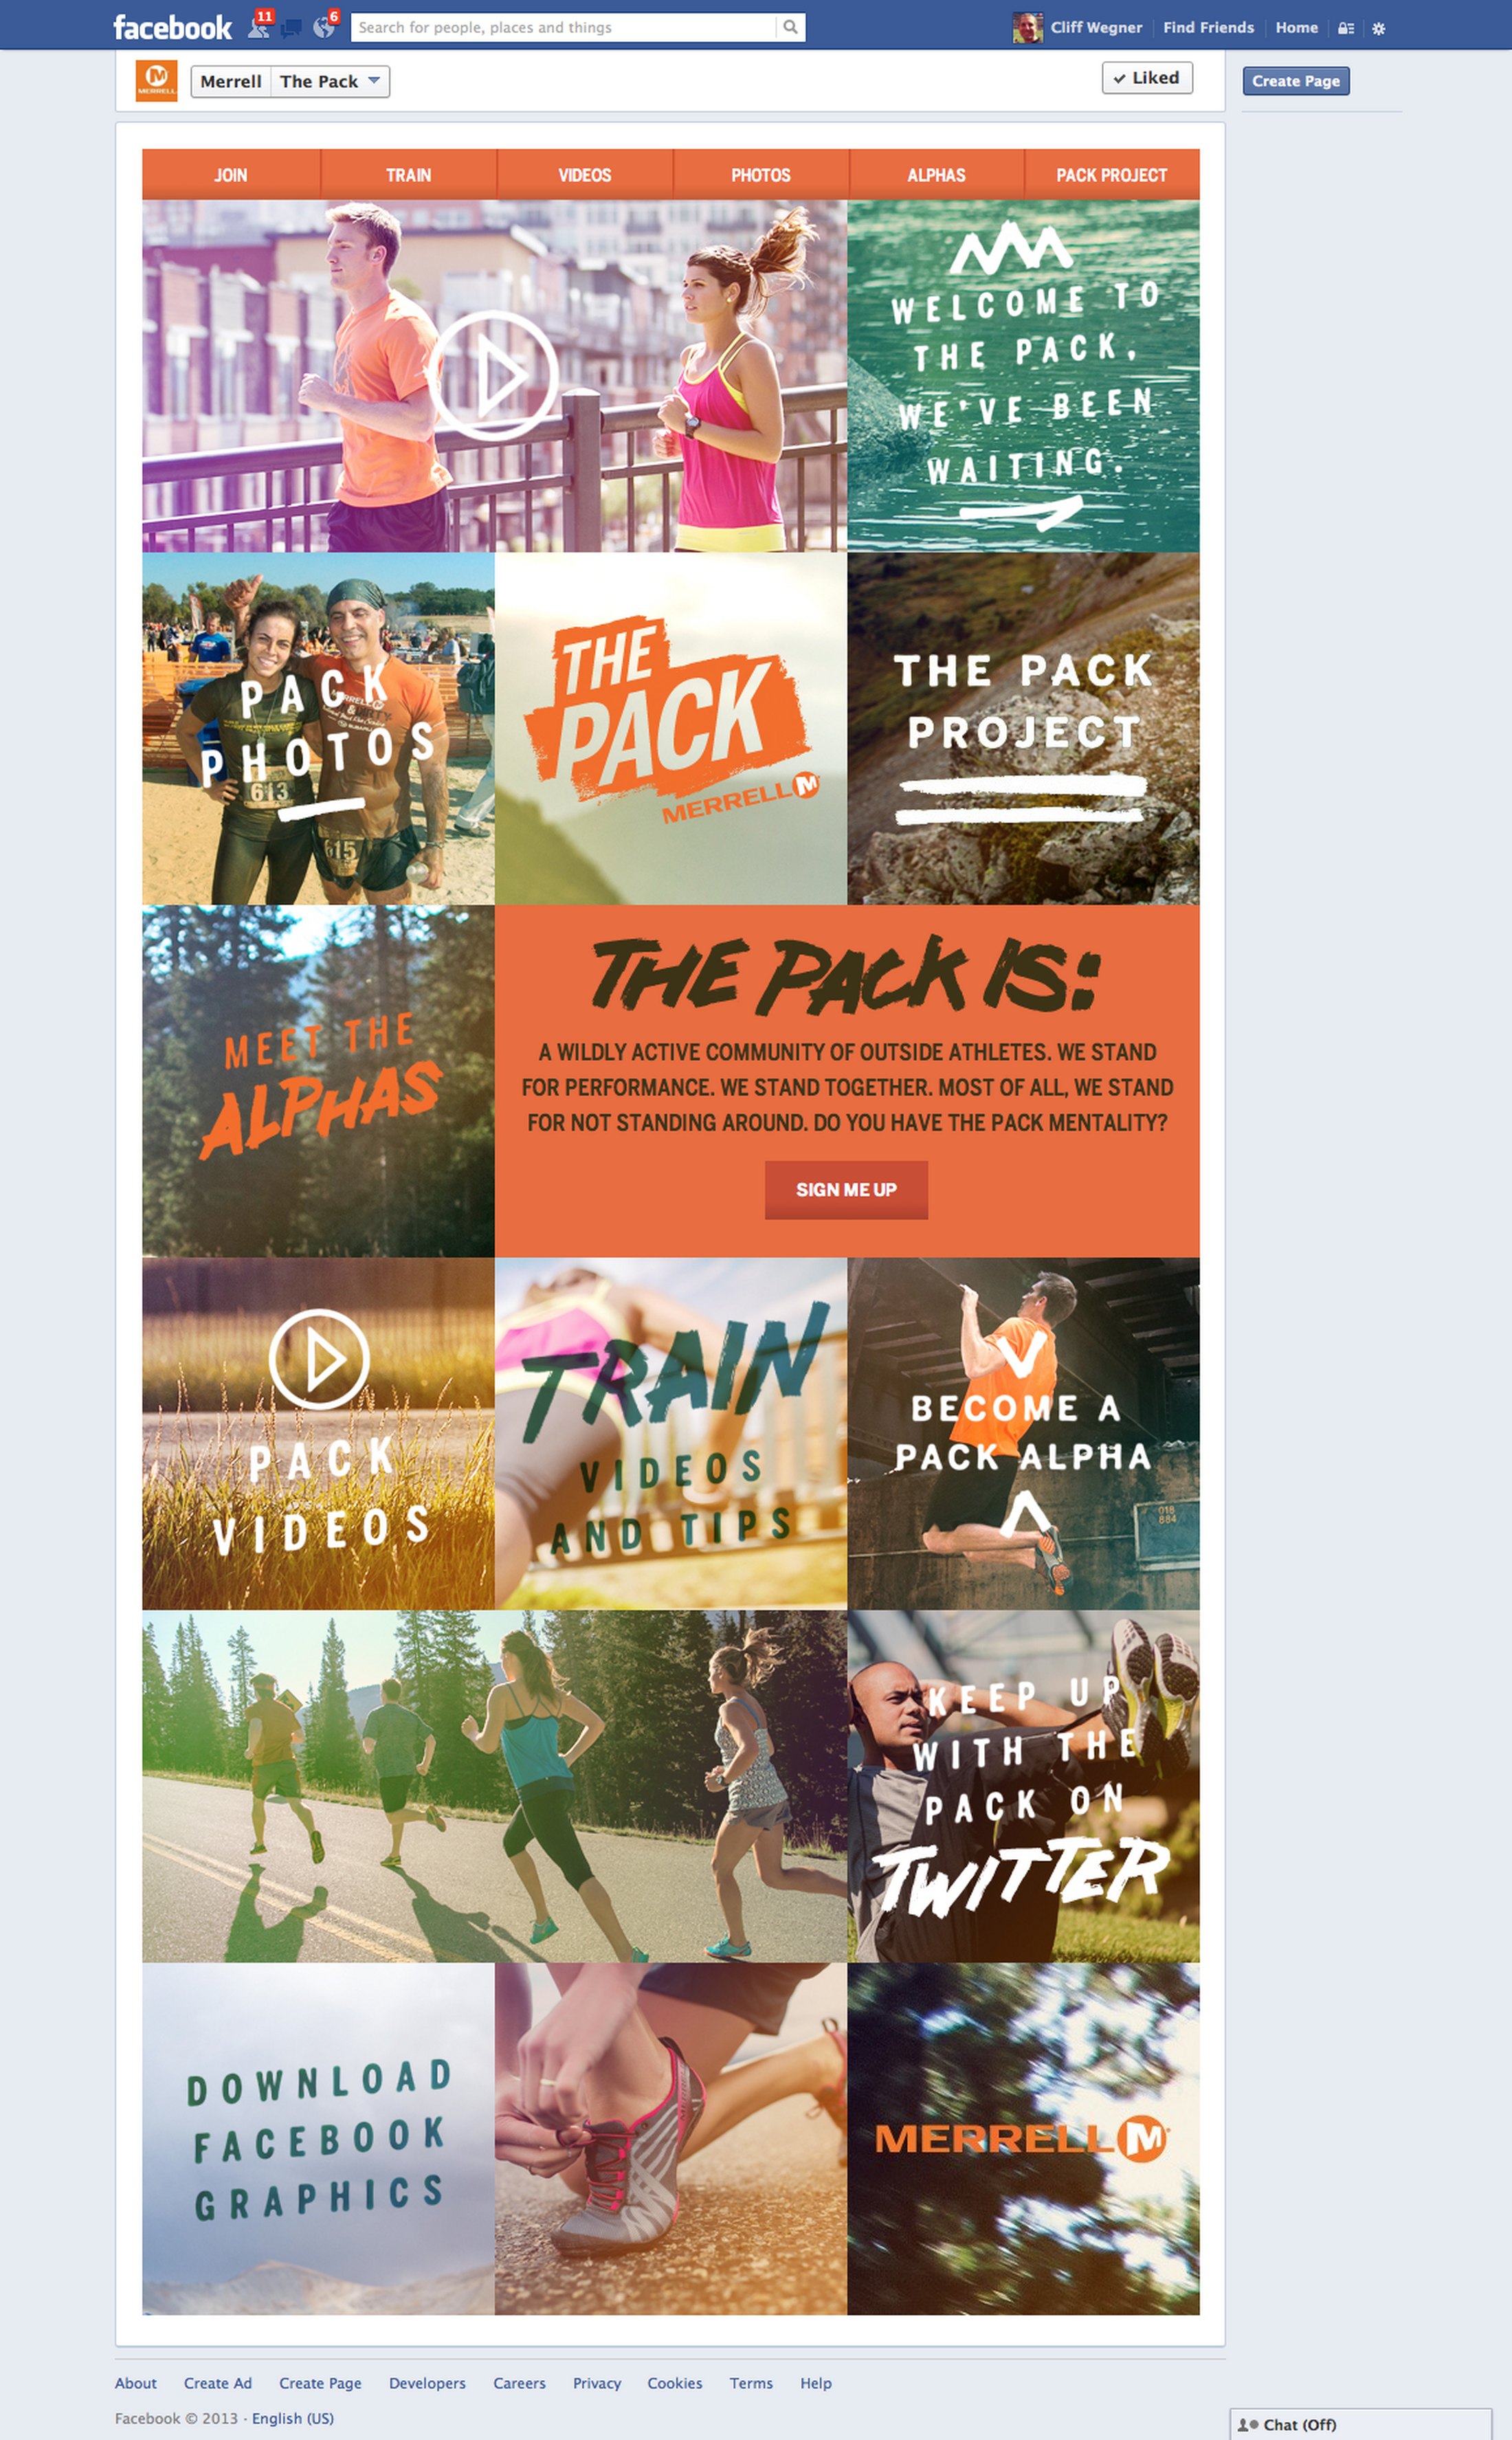 Screenshot of the Merrell Pack Facebook App Home Page